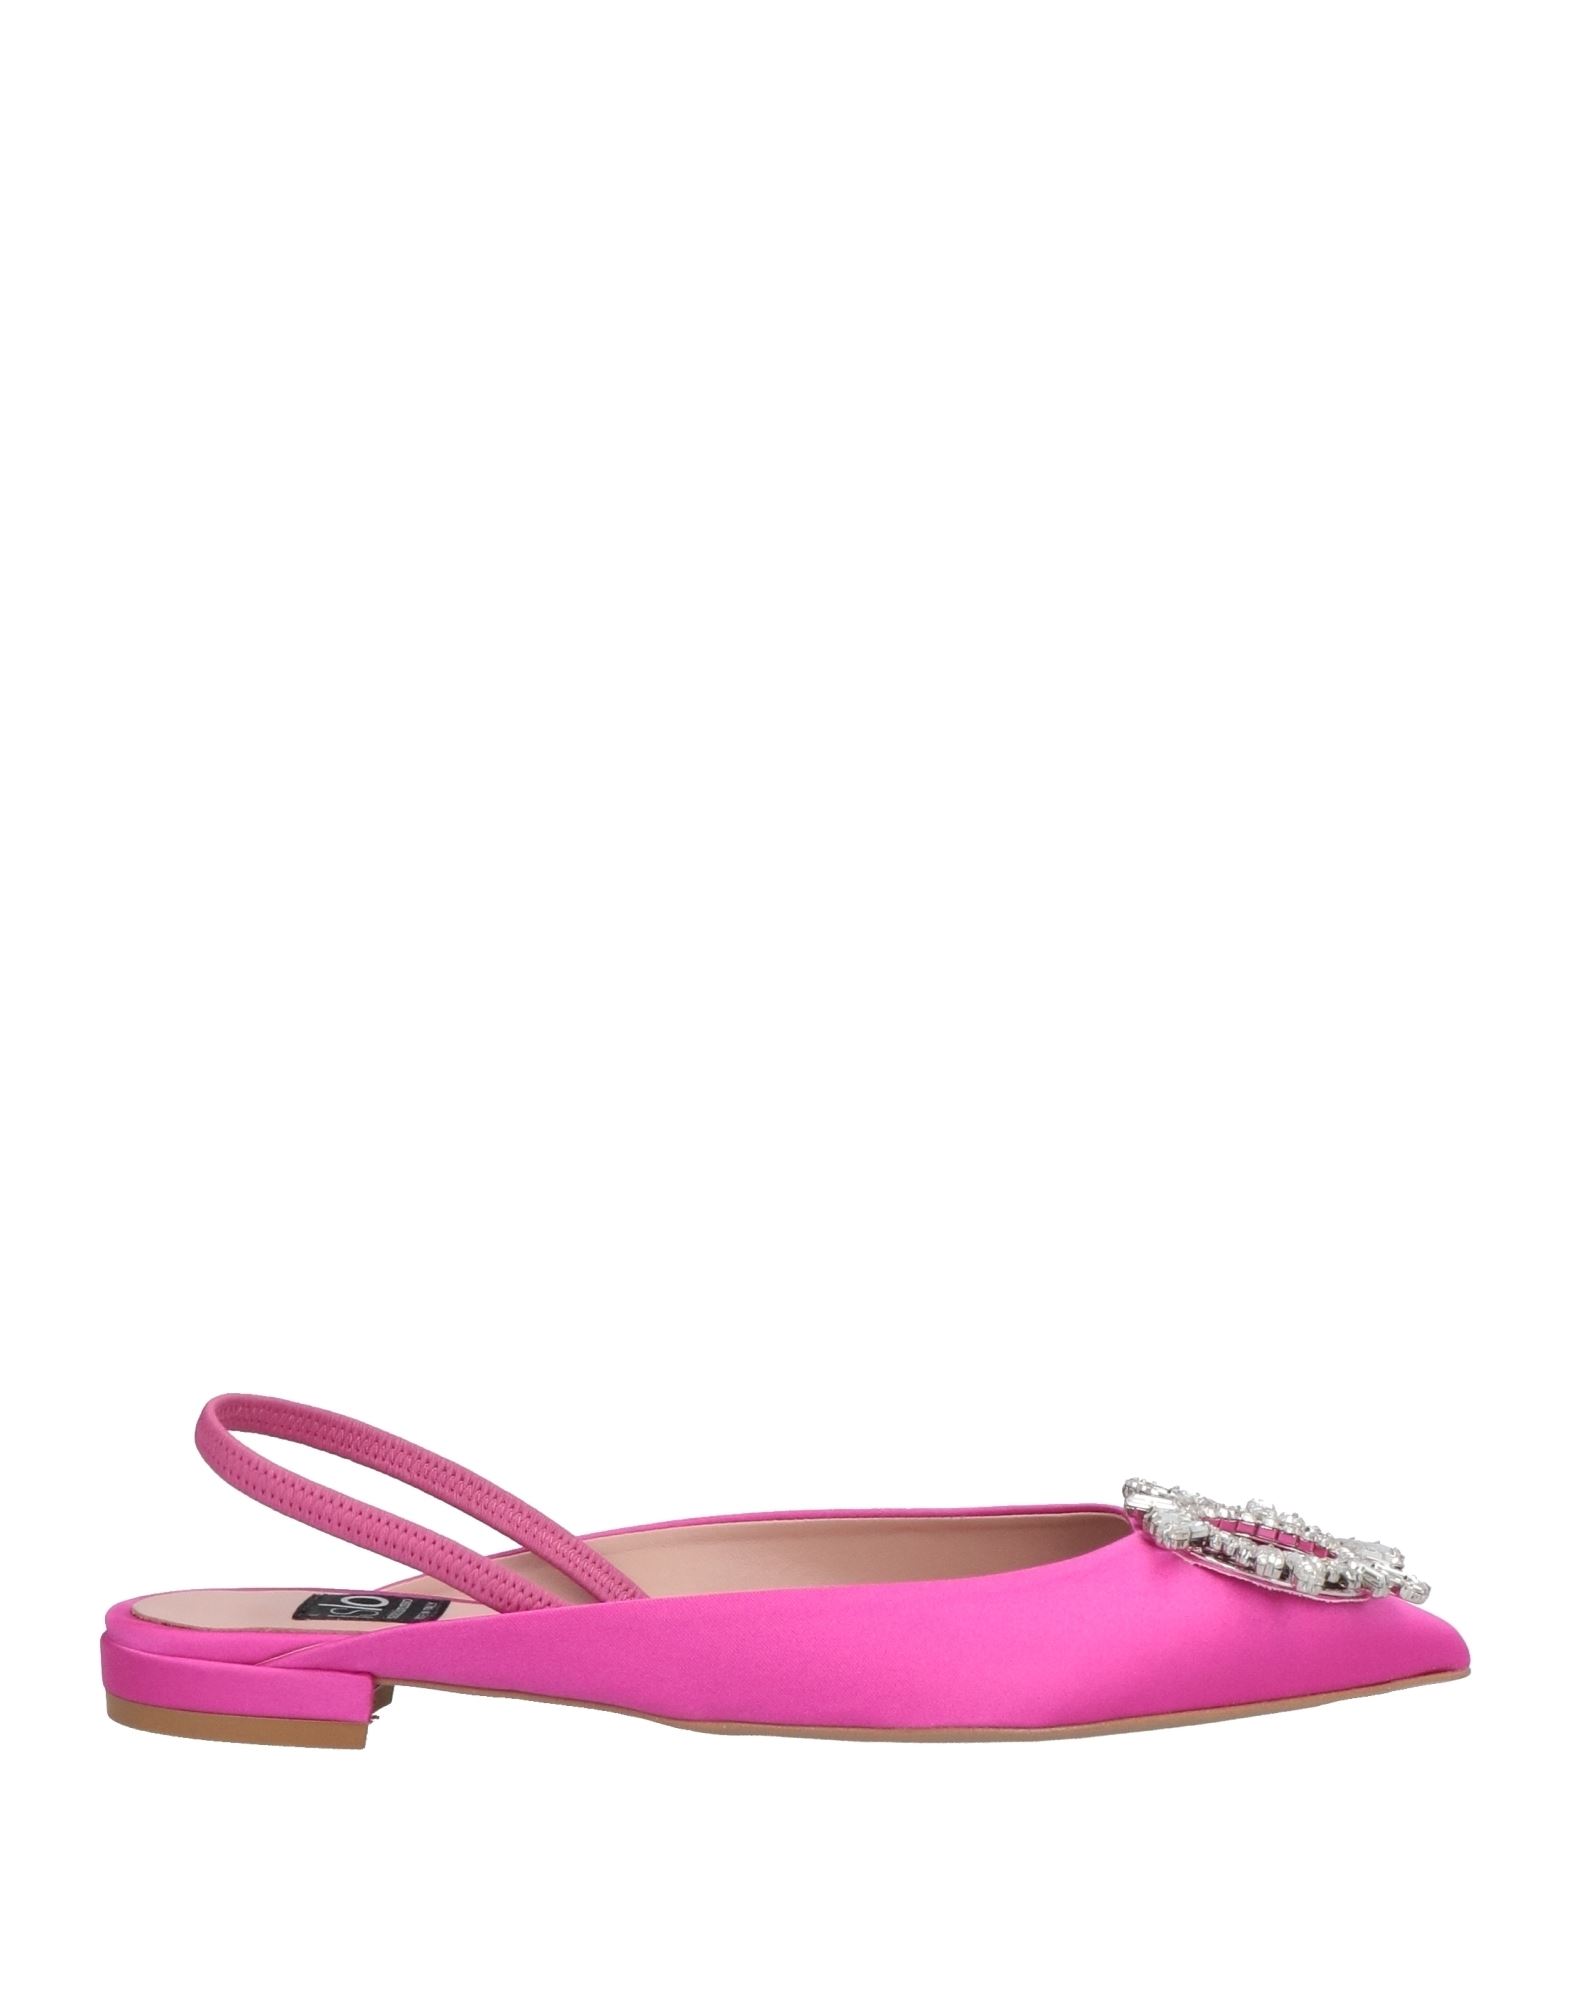 Islo Isabella Lorusso Ballet Flats In Pink